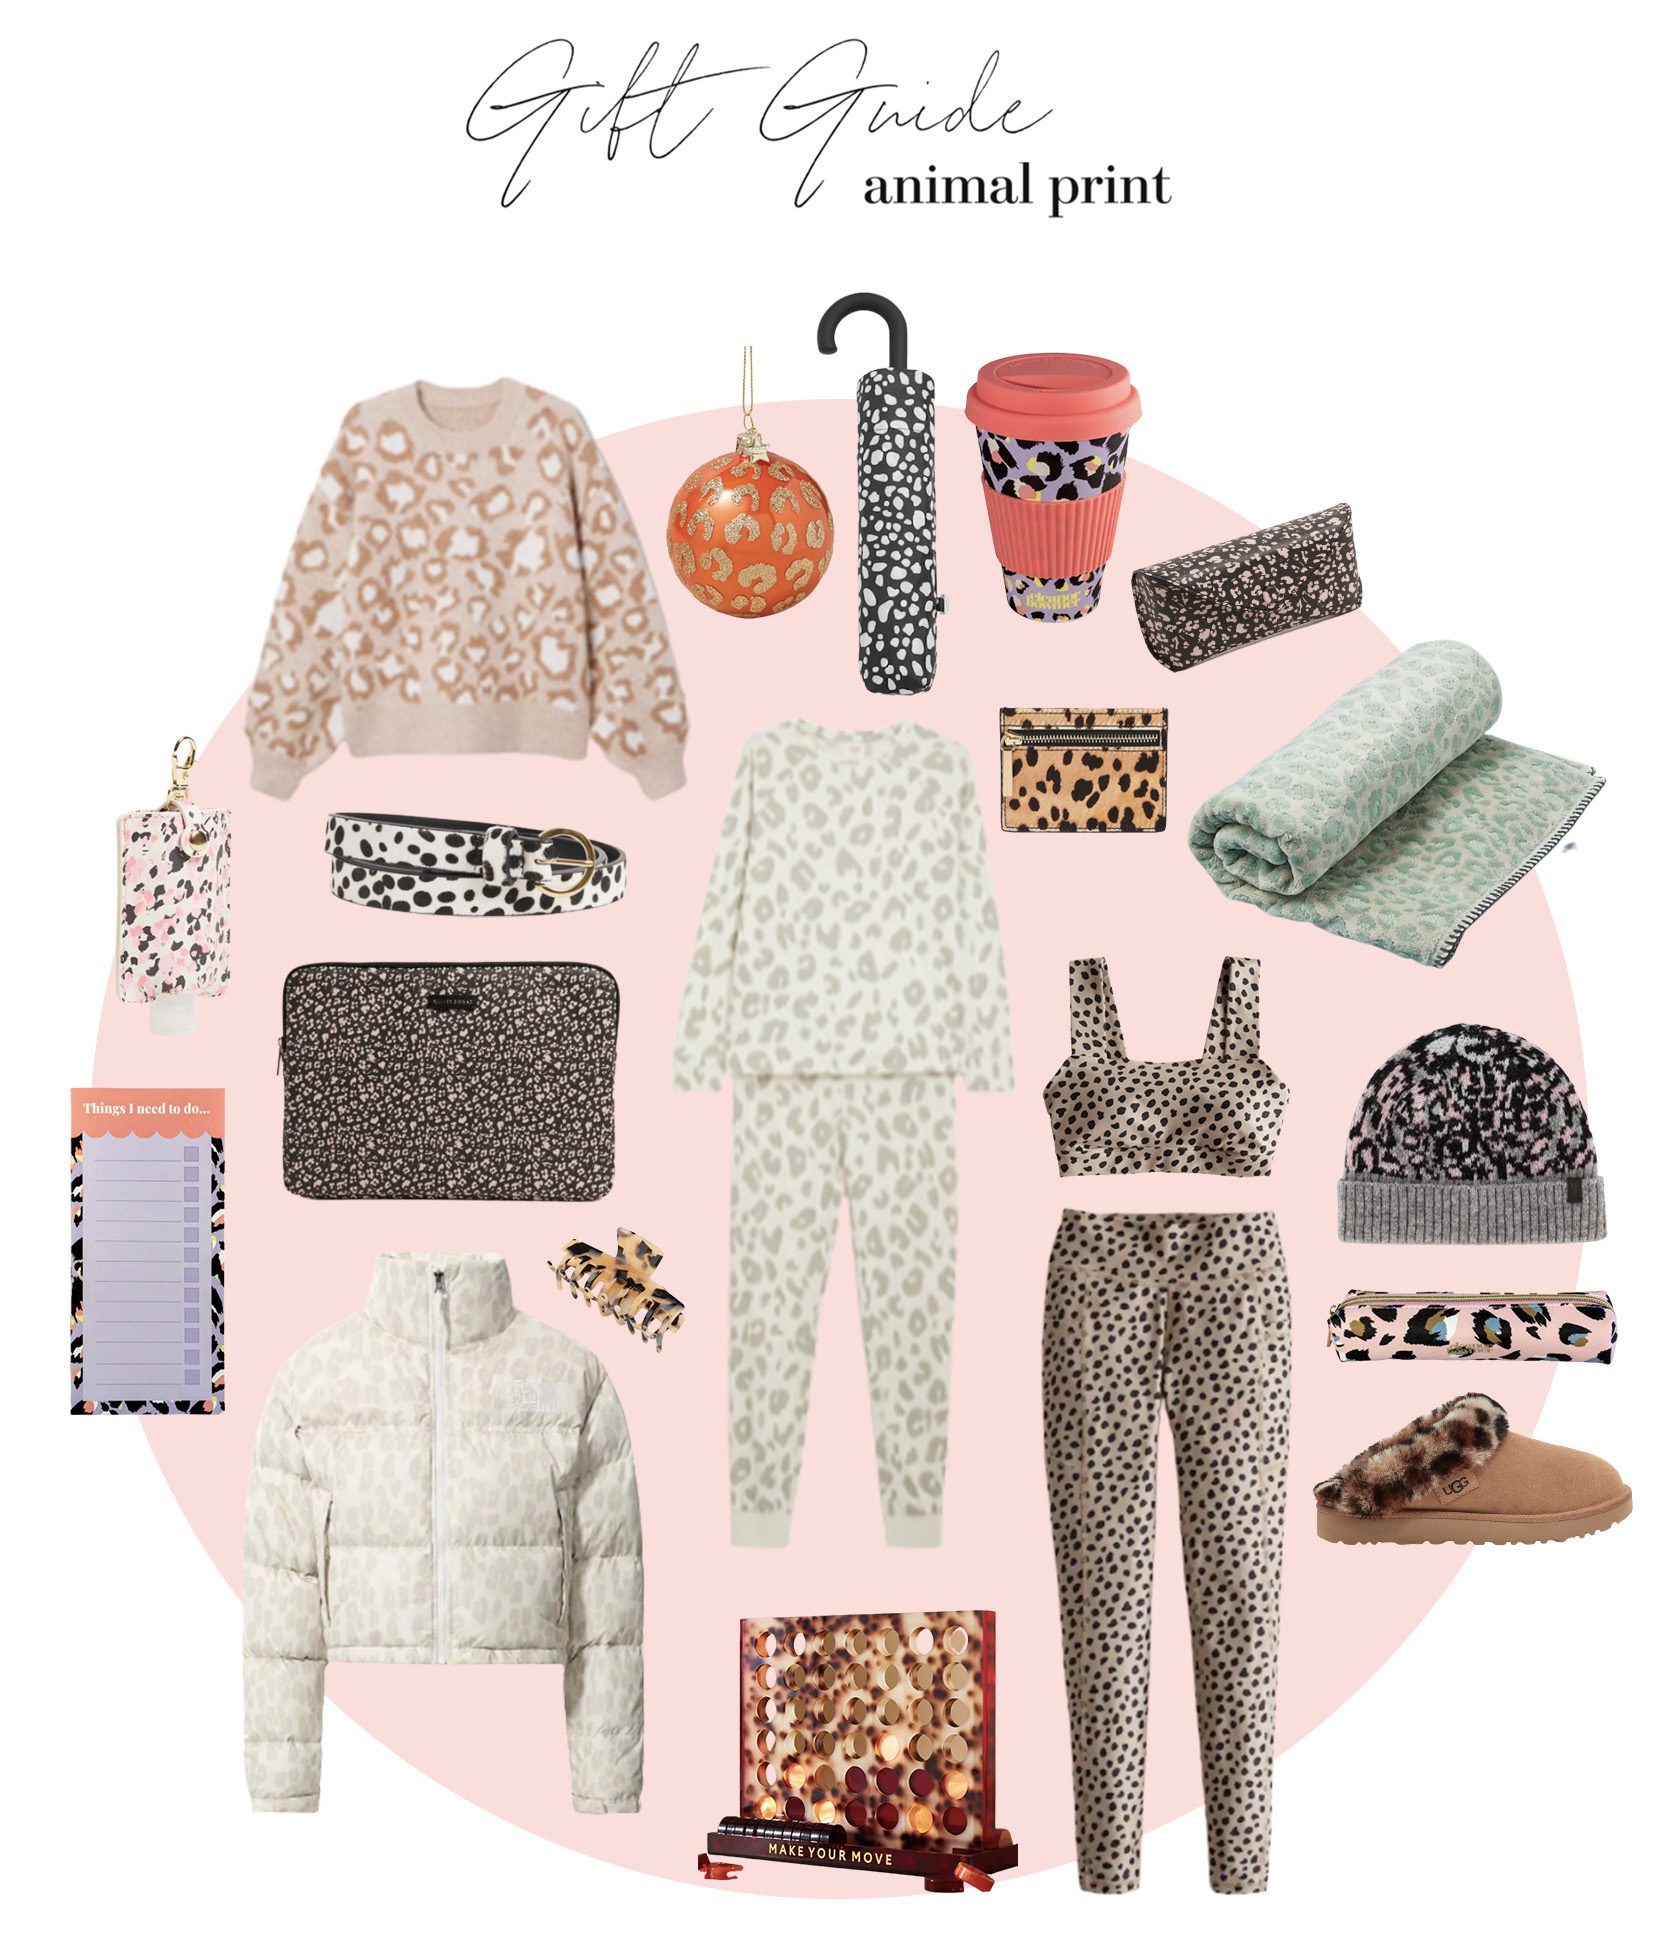 A Gift Guide Animal Print